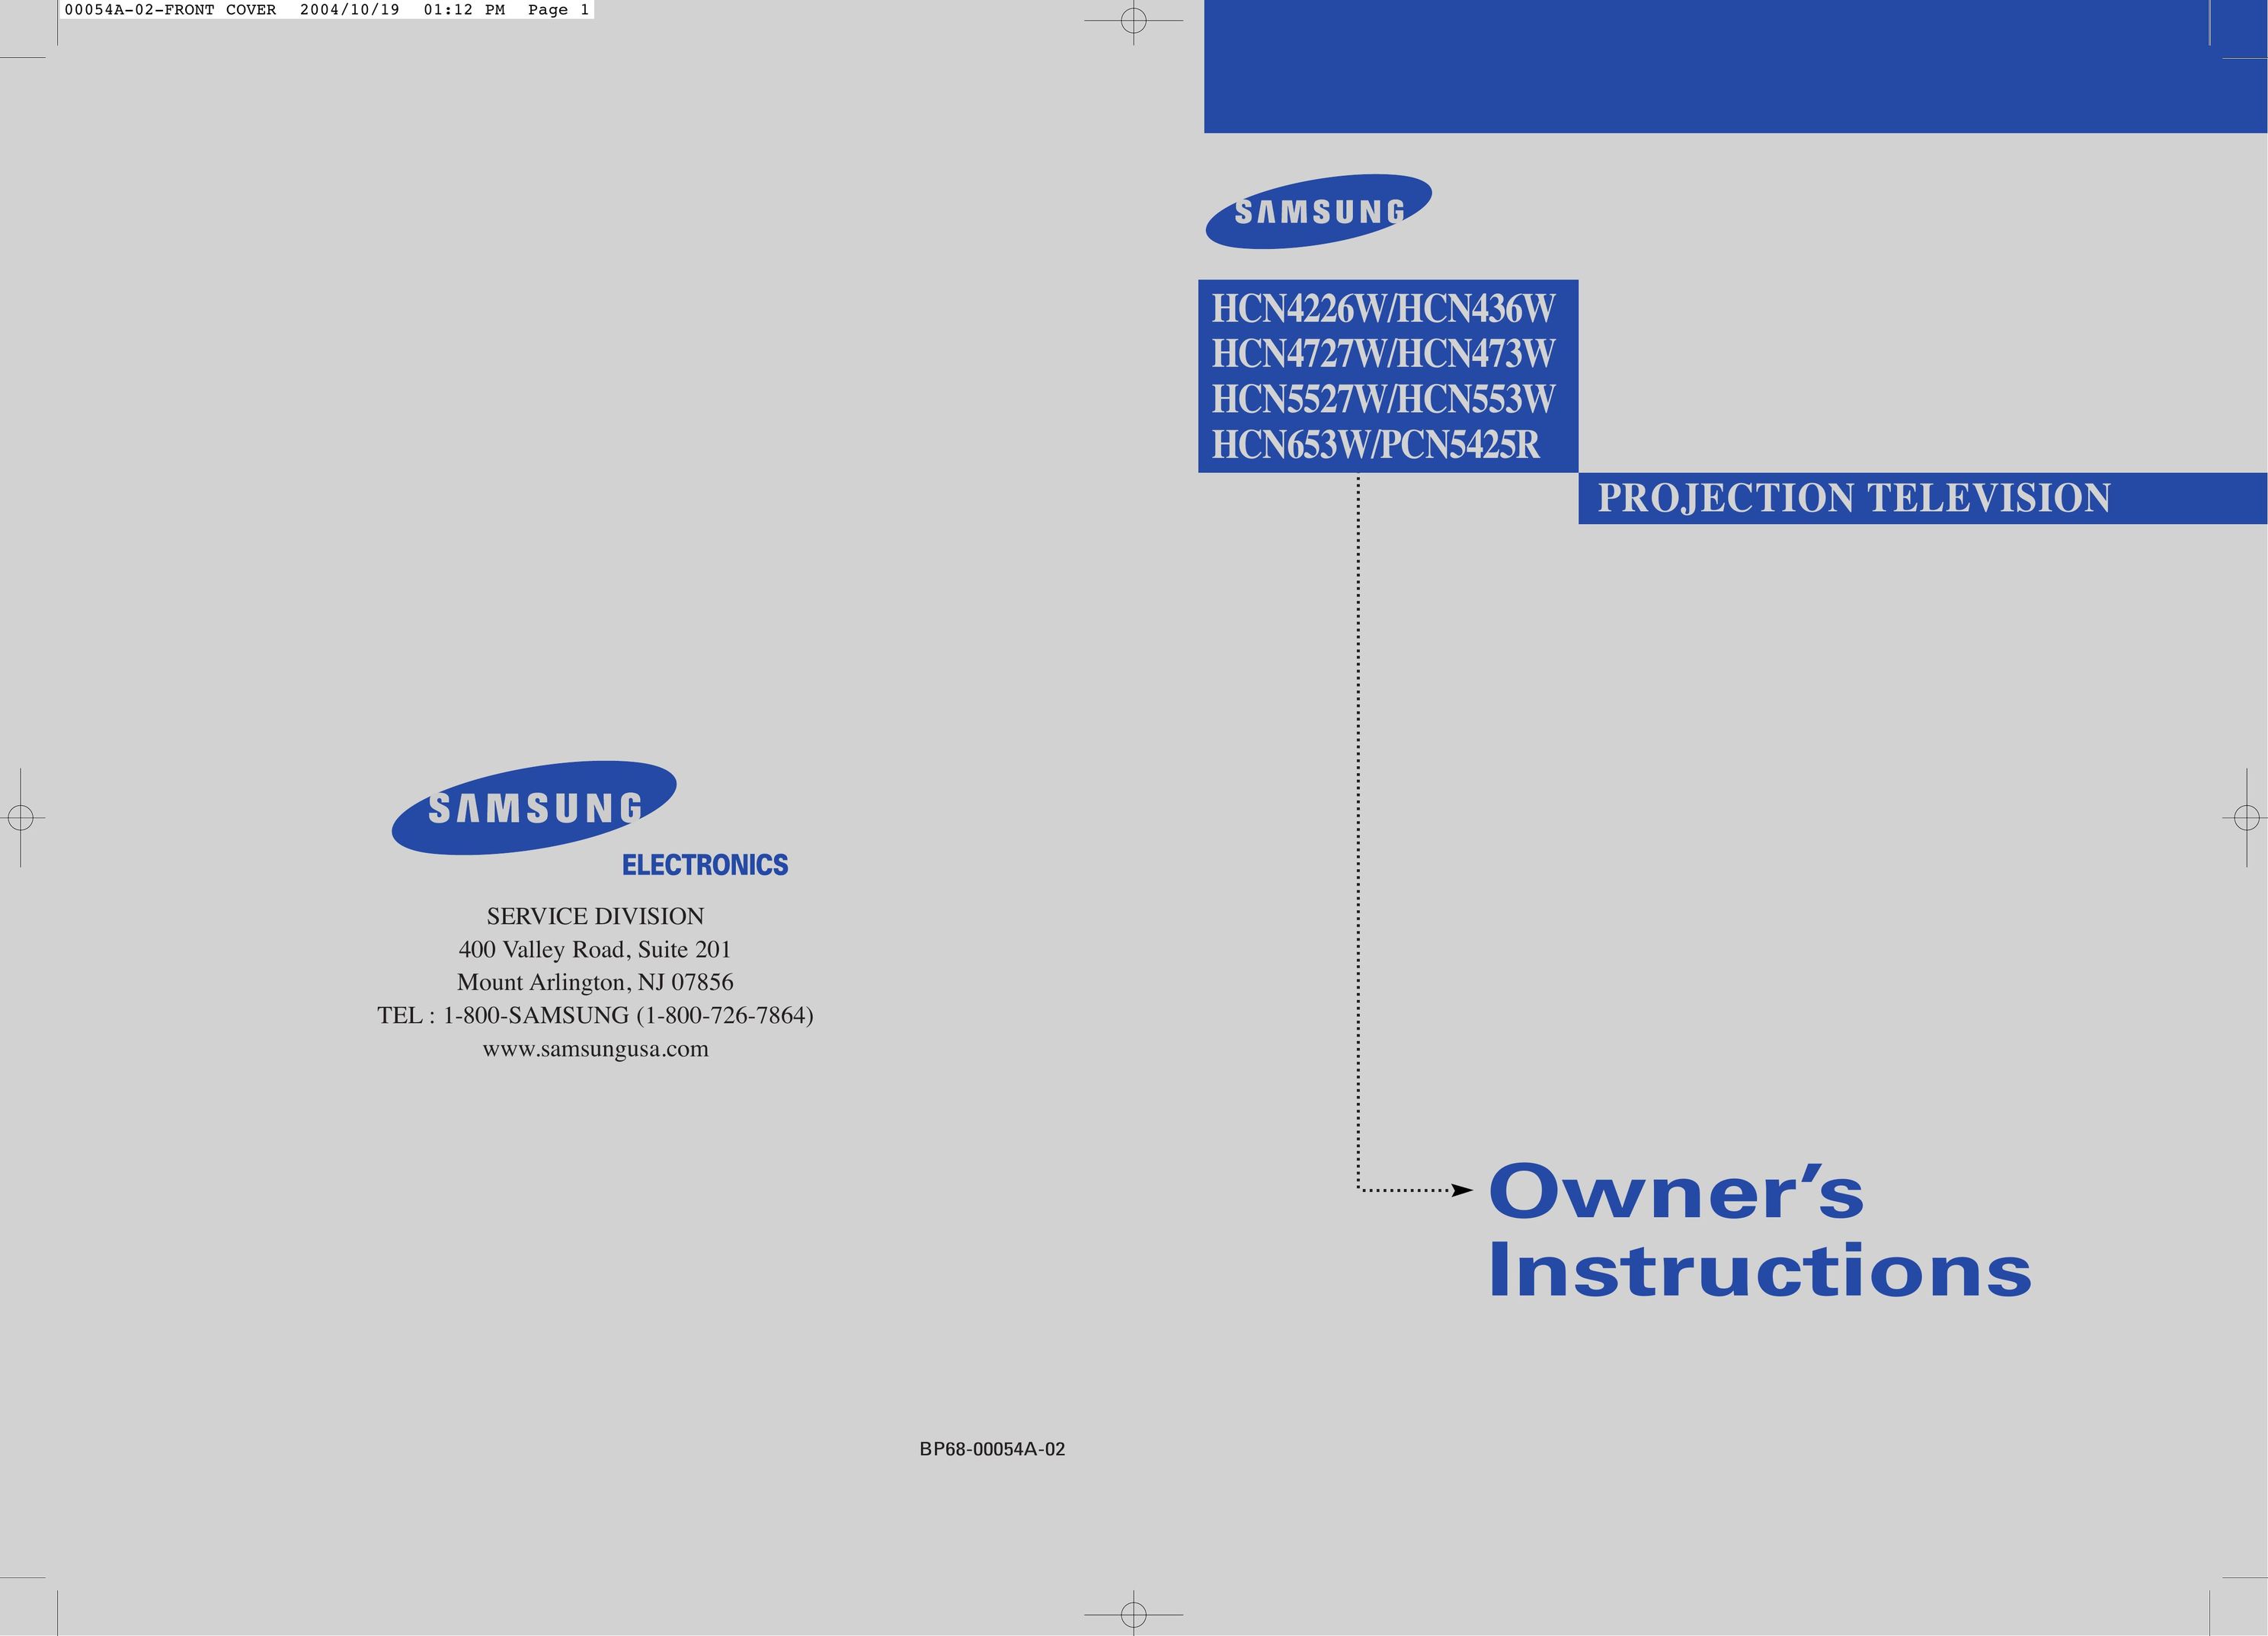 Samsung HCN436W Projection Television User Manual